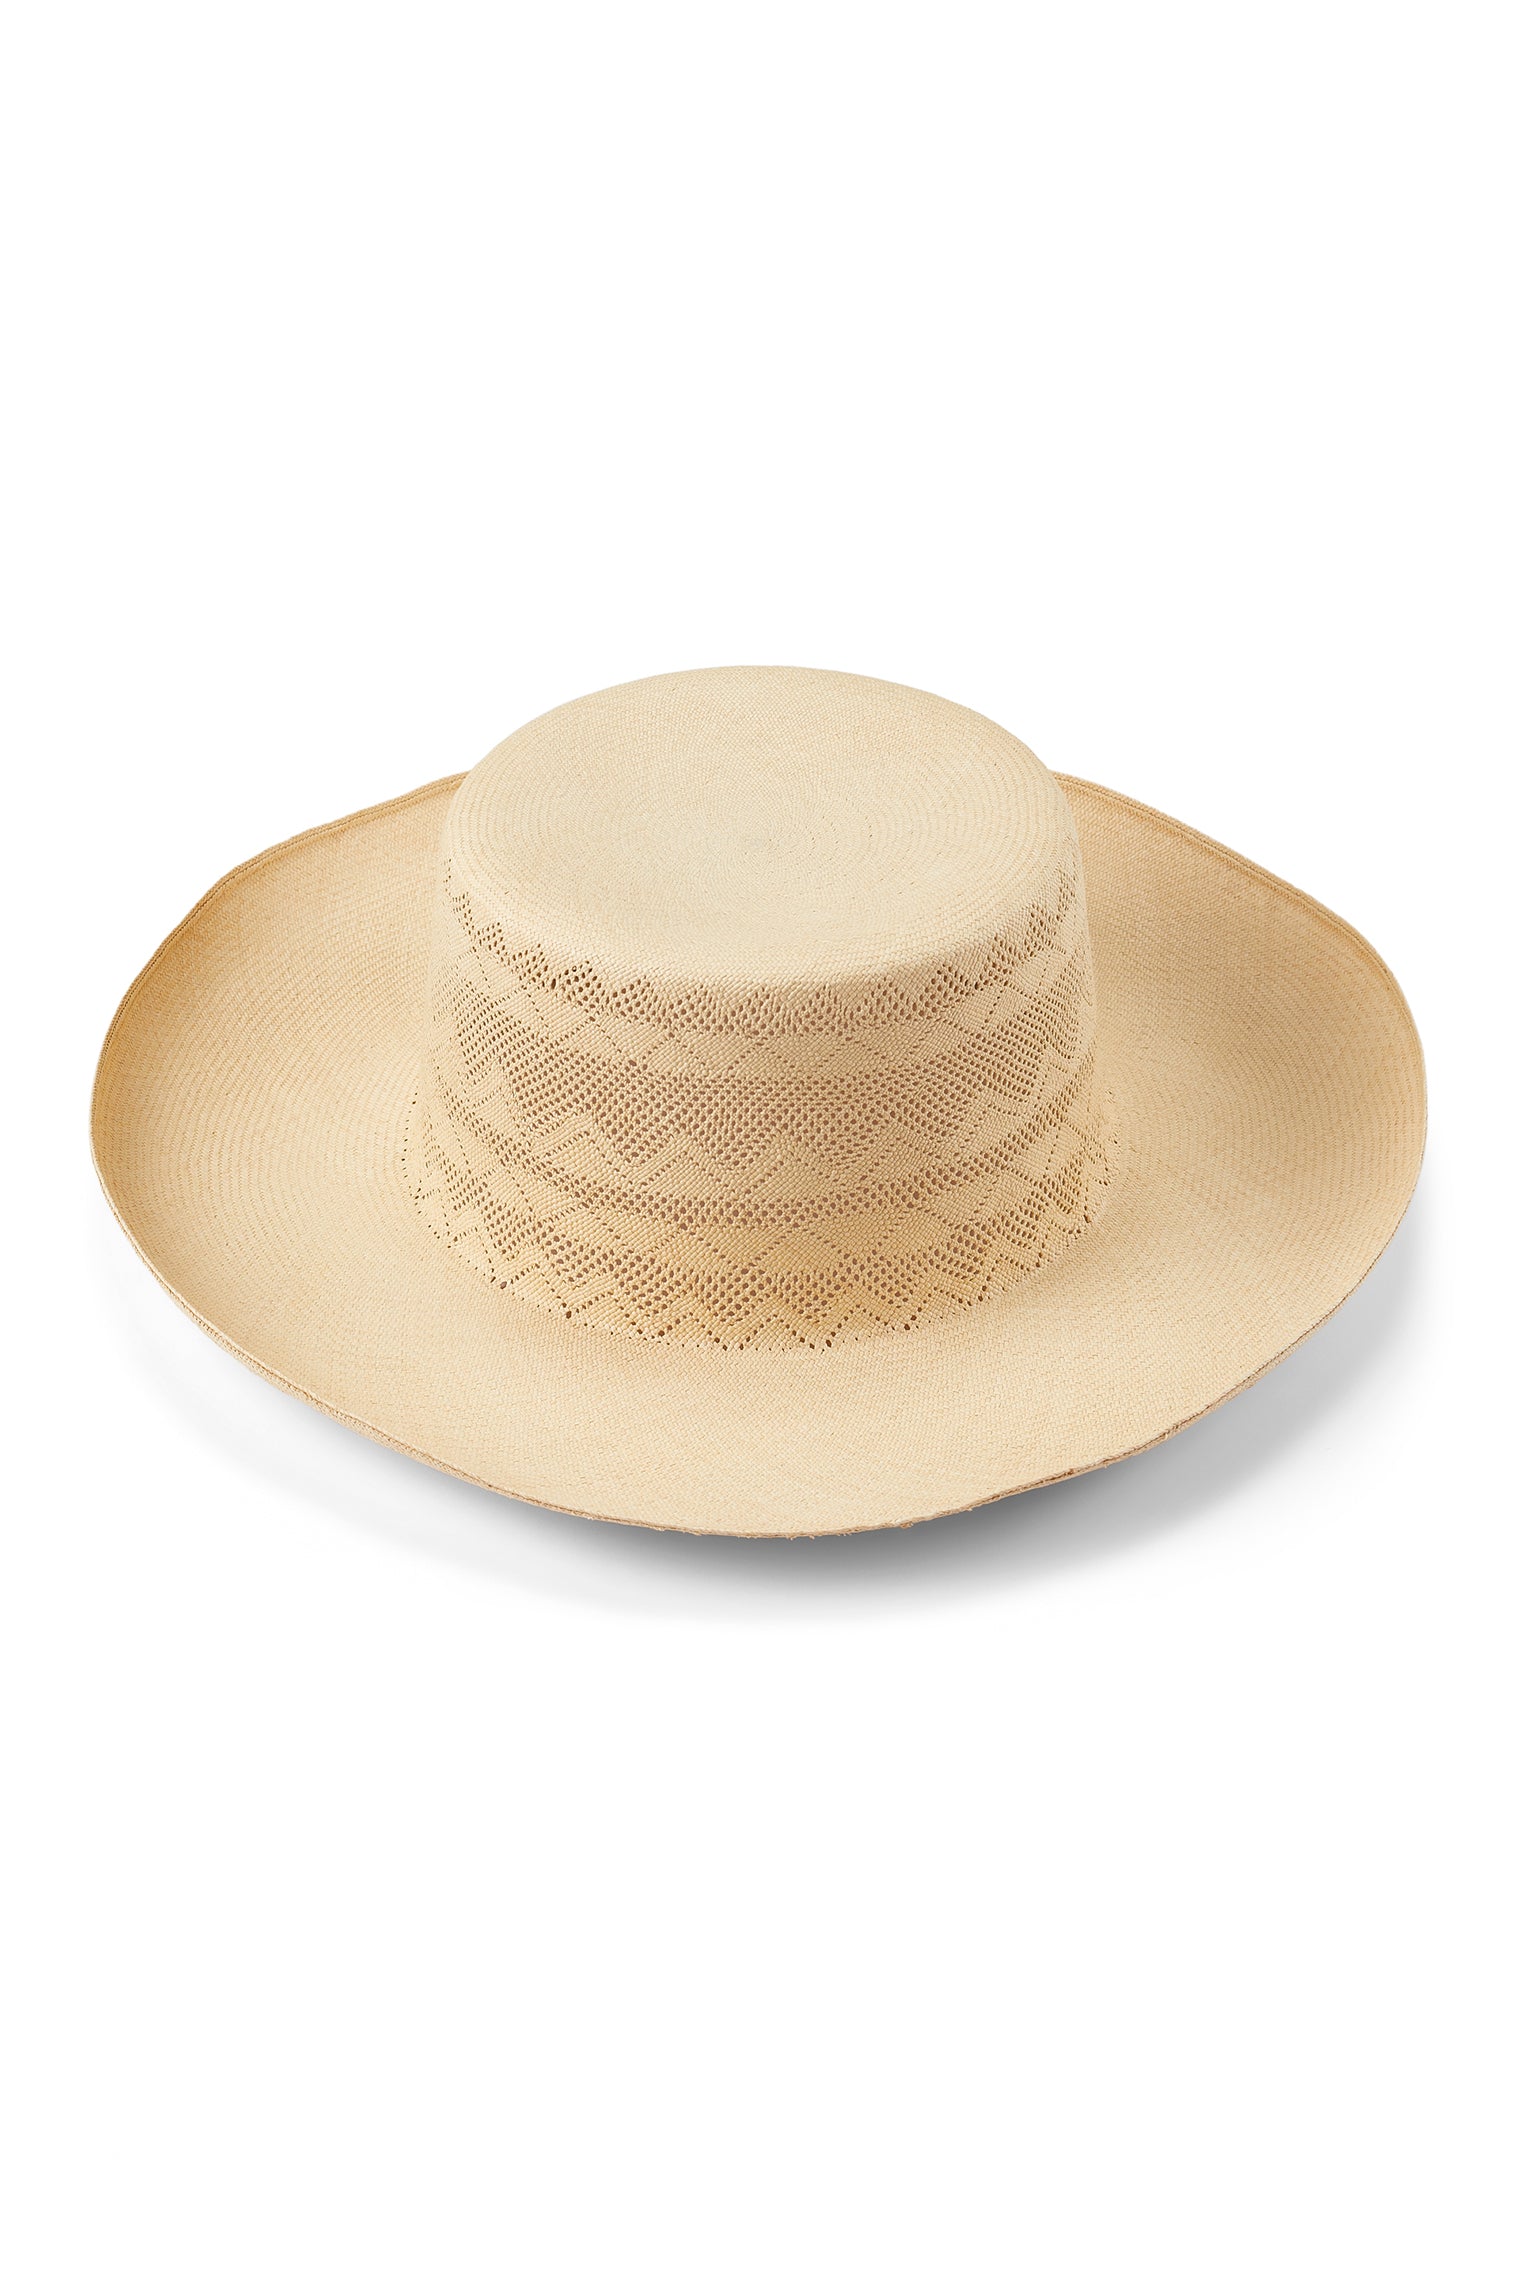 Nell Woven Panama - The Bespoke Embroidered Panama Hat Collection - Lock & Co. Hatters London UK